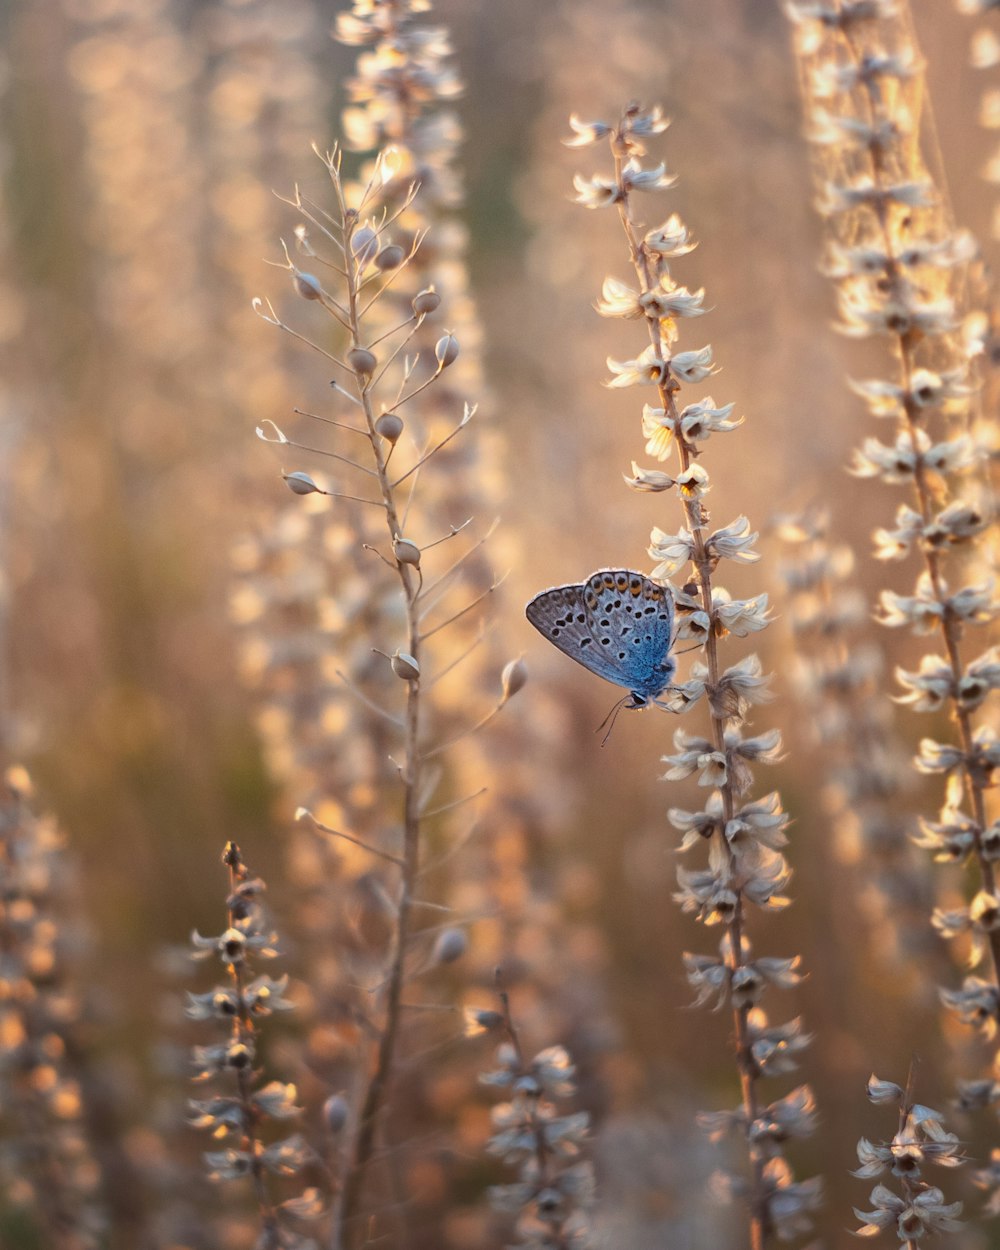 blue butterfly perched on brown plant during daytime